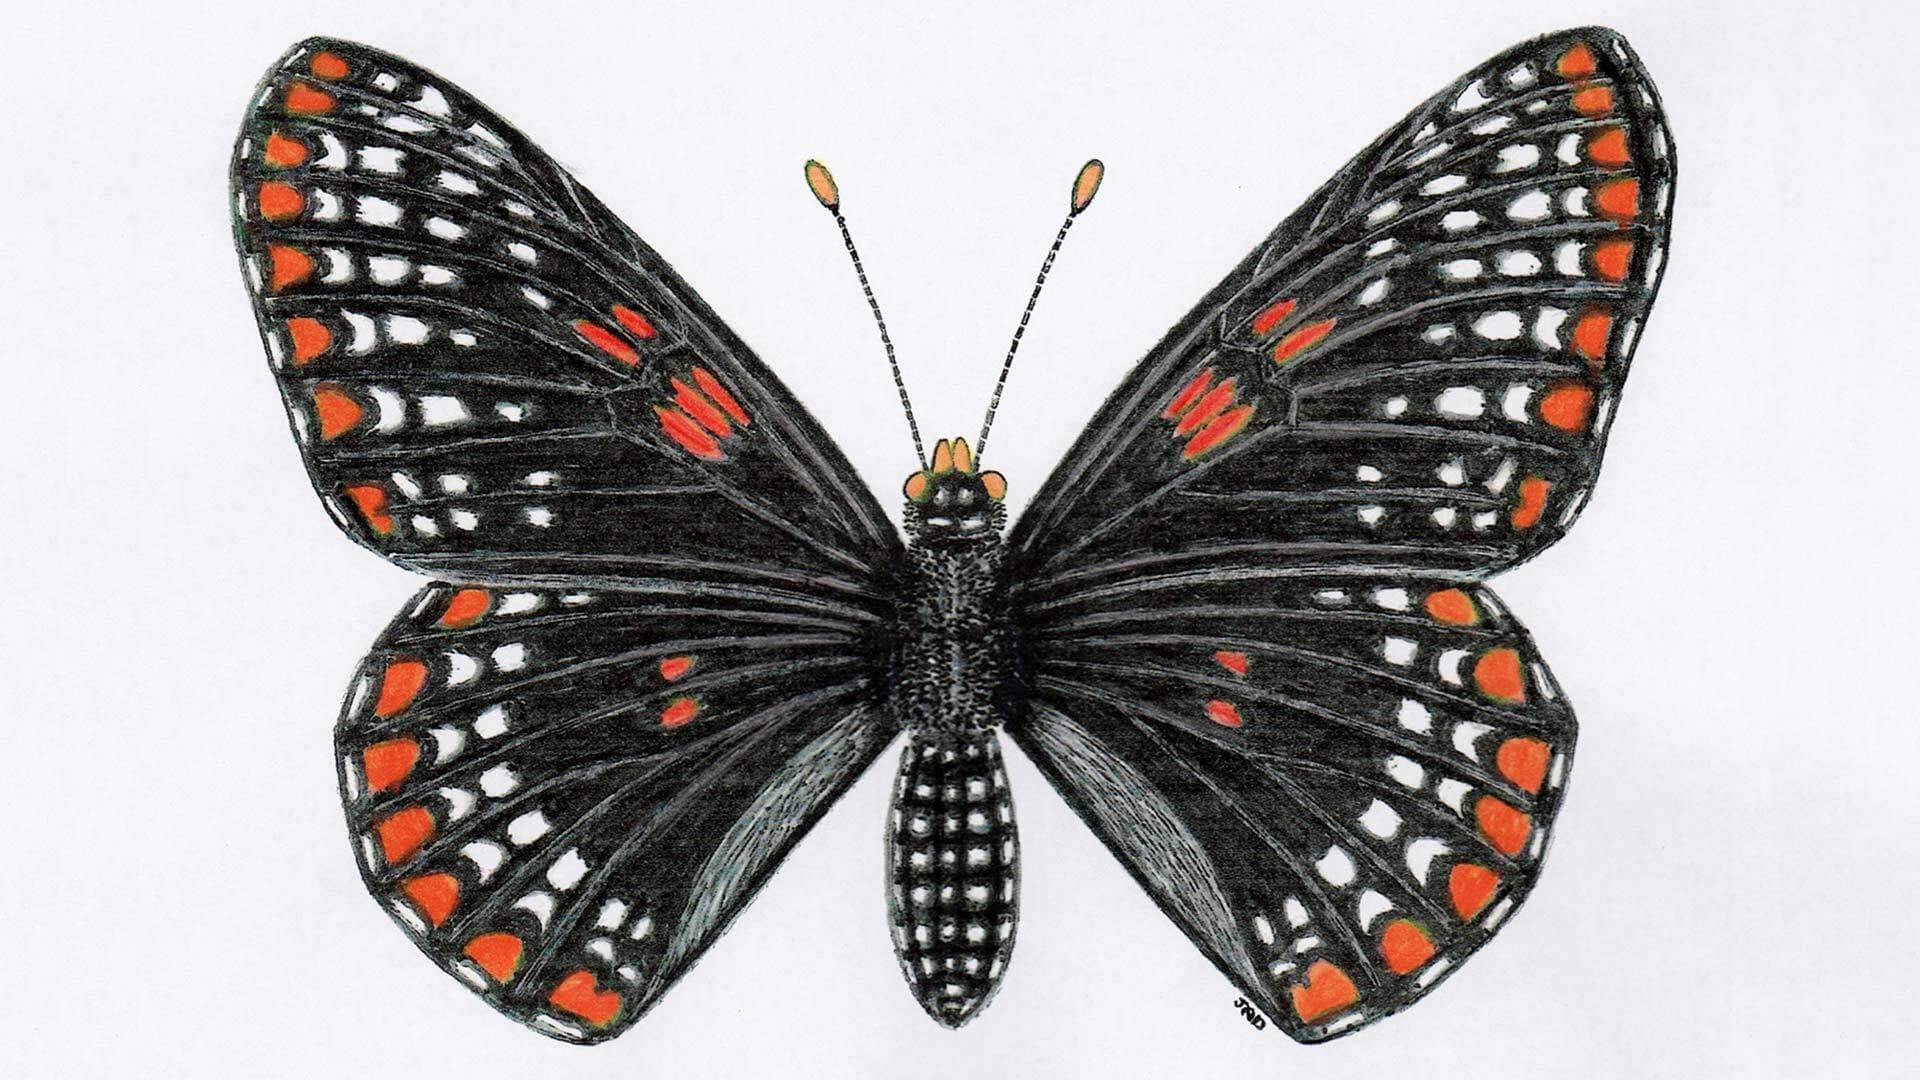 Baltimore checkerspot butterfly